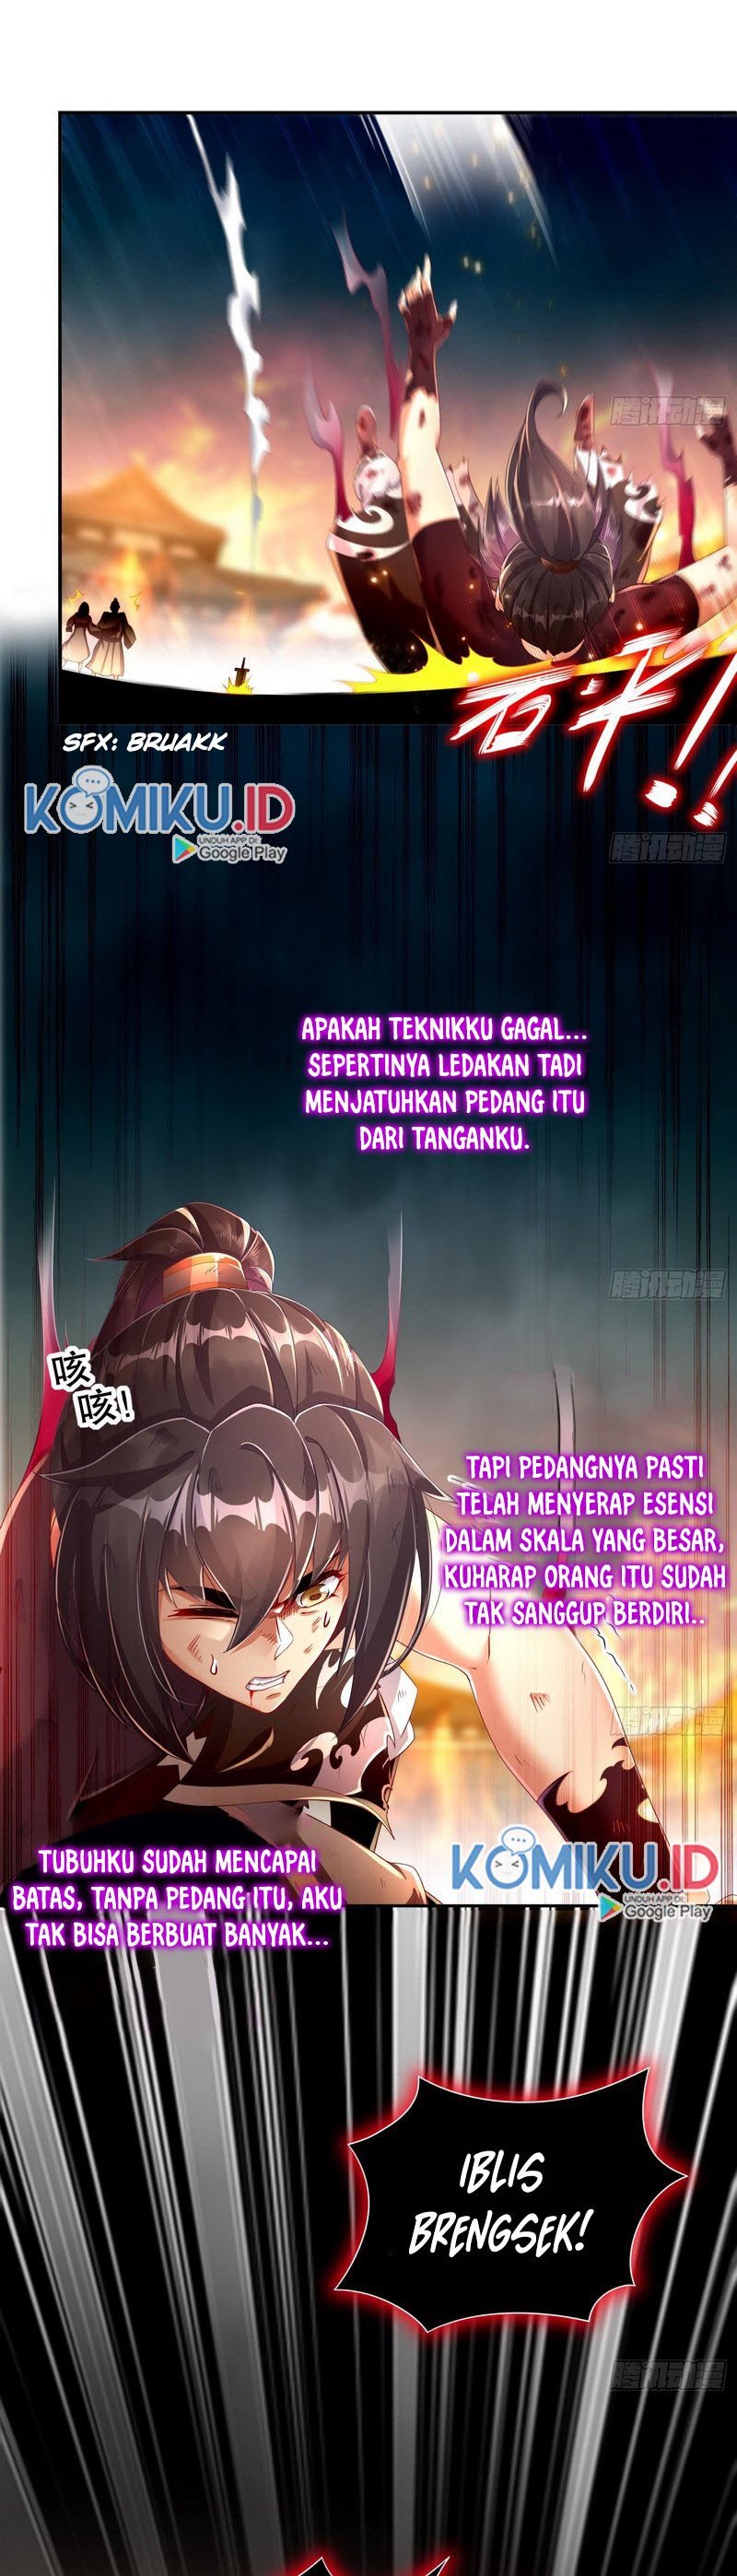 Rebirth of the Demon Reign (The Rebirth of the Demon God) Chapter 75